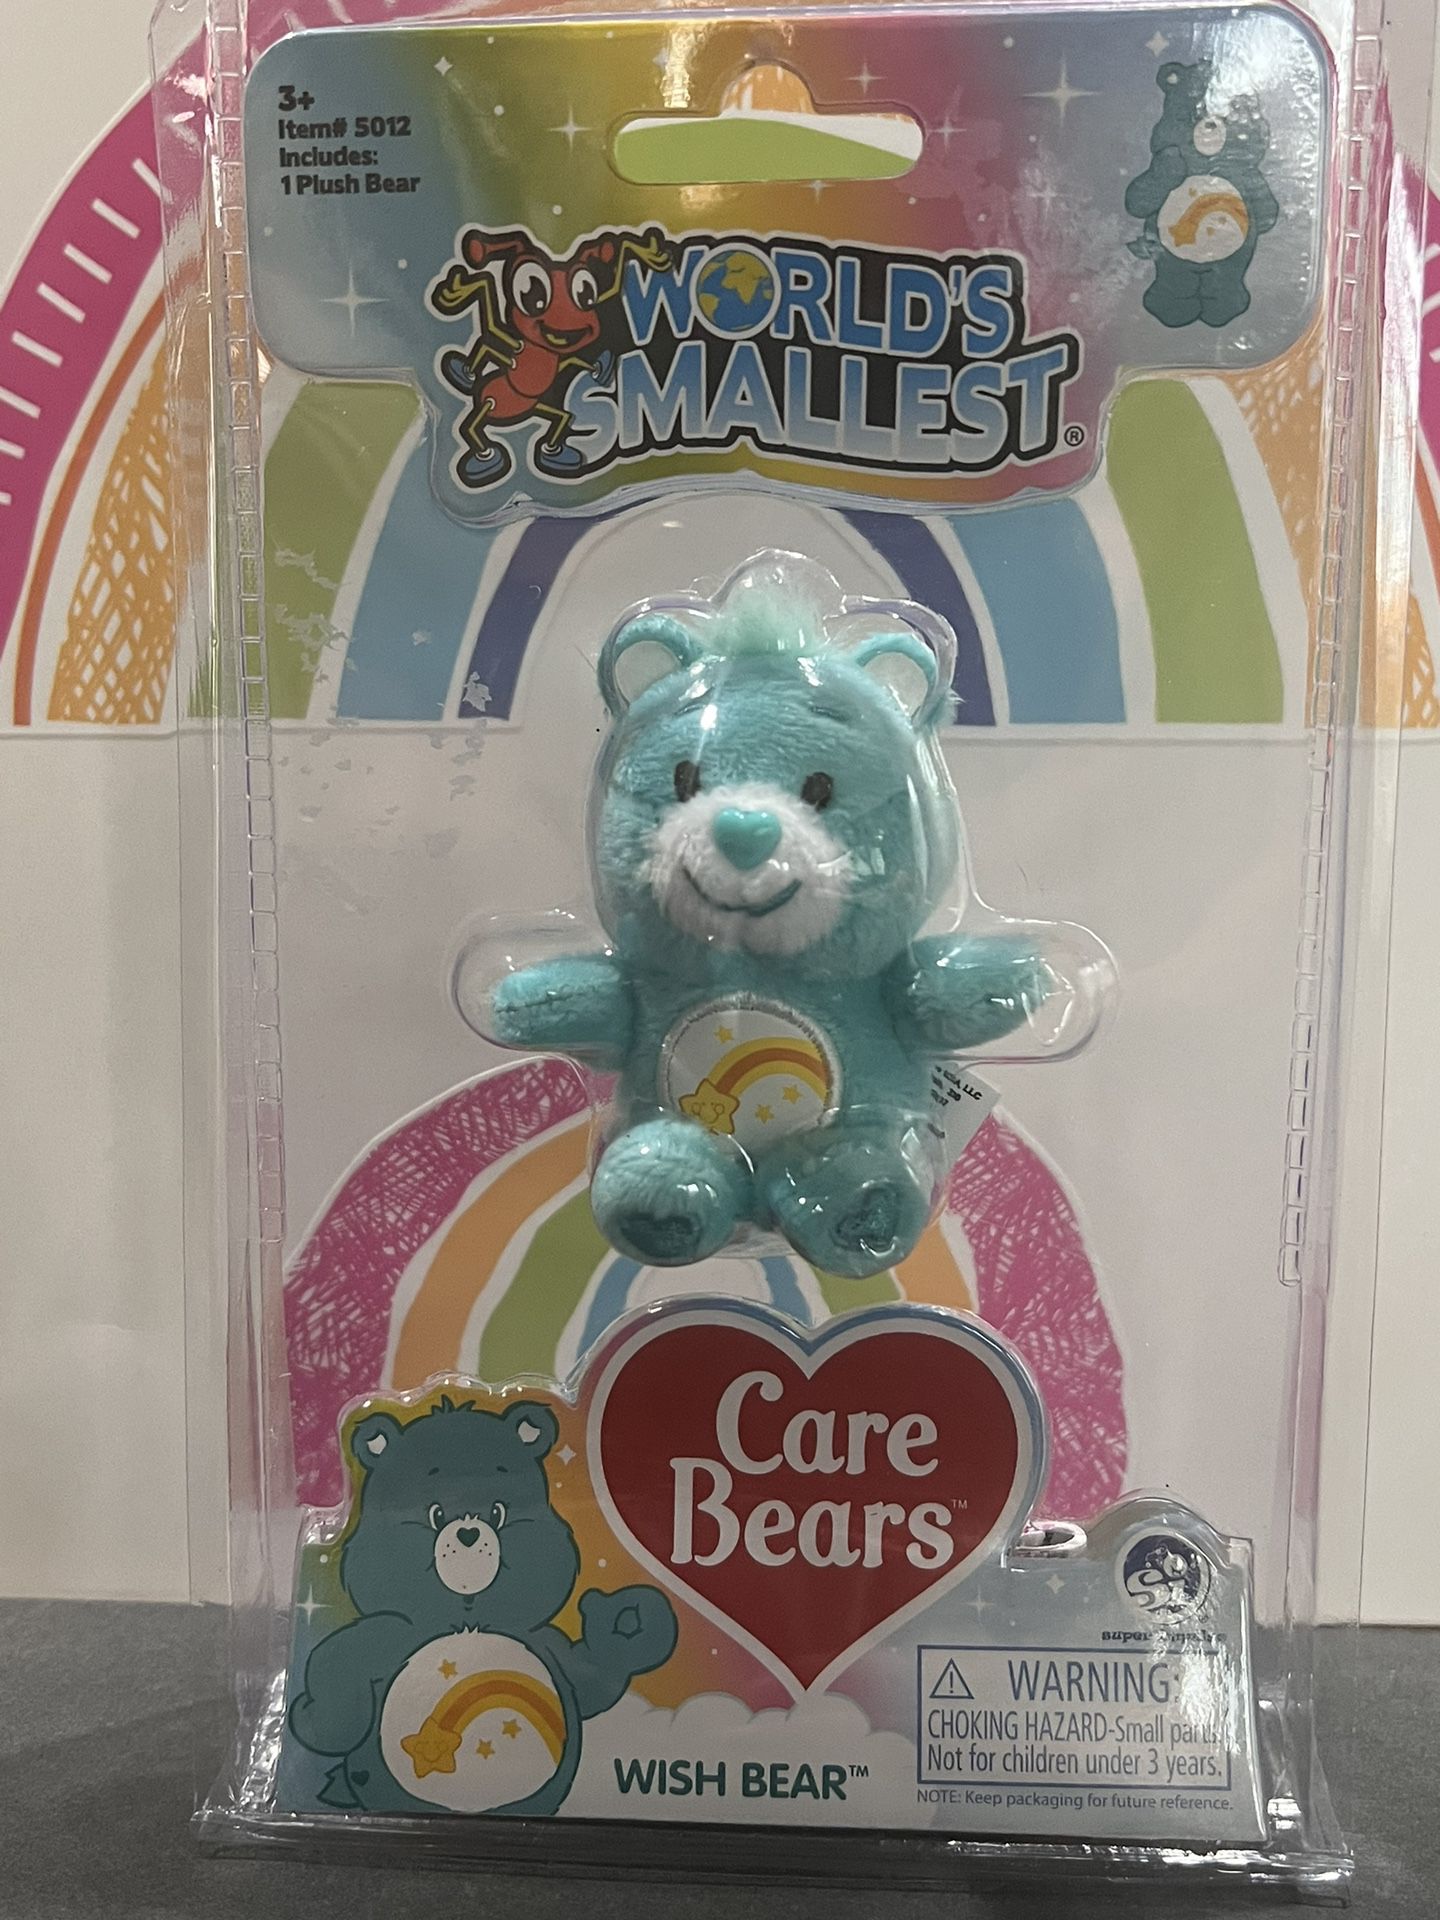 WORLD’S SMALLEST CAREBEAR “WISH BEAR” IN SEALED  PACKAGE